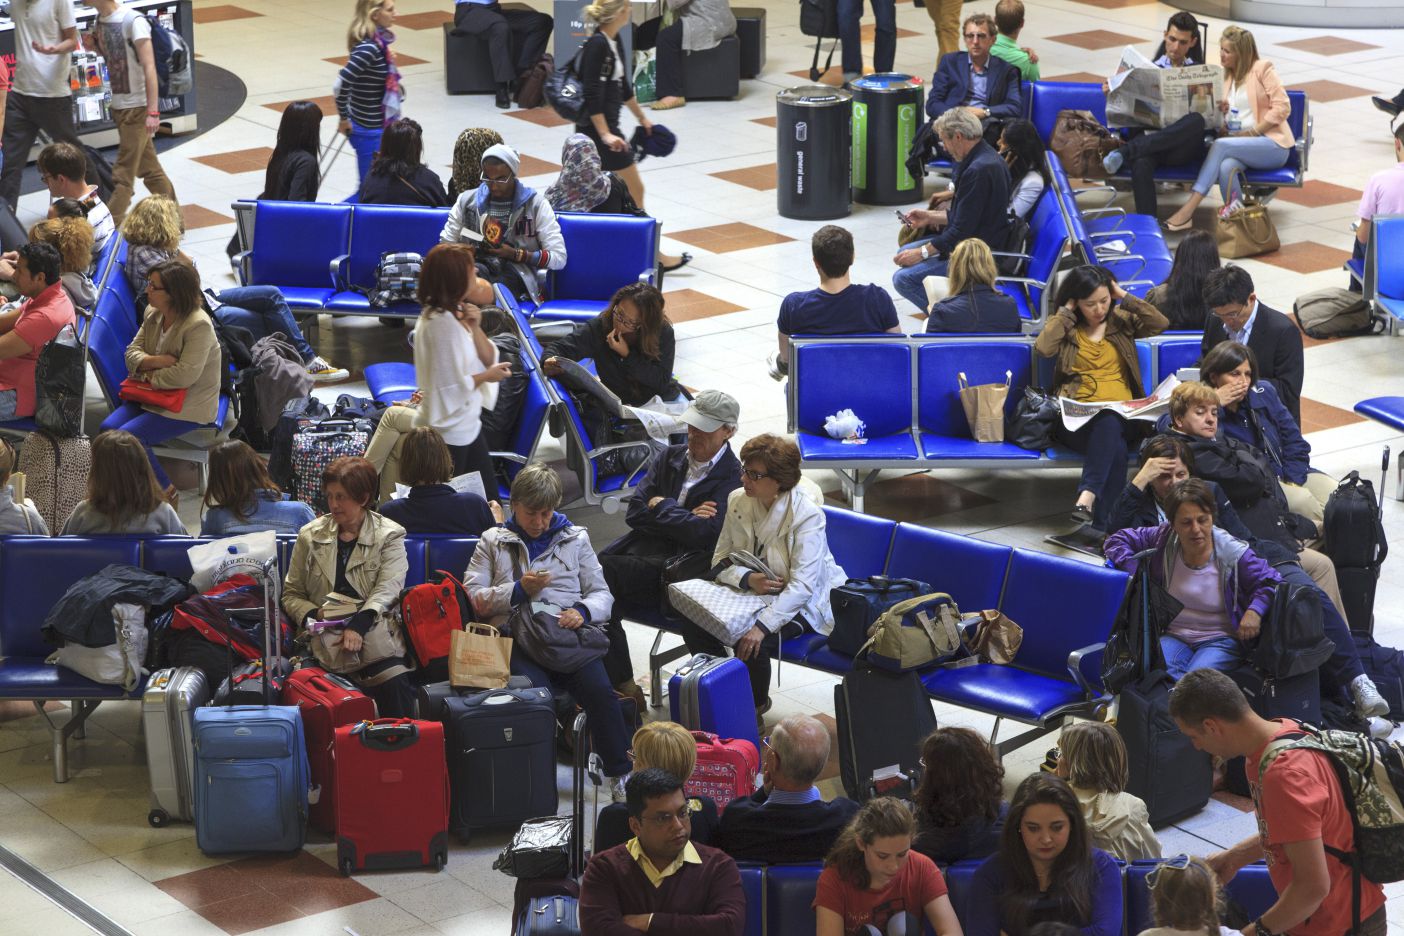 Photo shows a group of people in a waiting room of an airport, which signifies the stressful experience that many associate with flying.